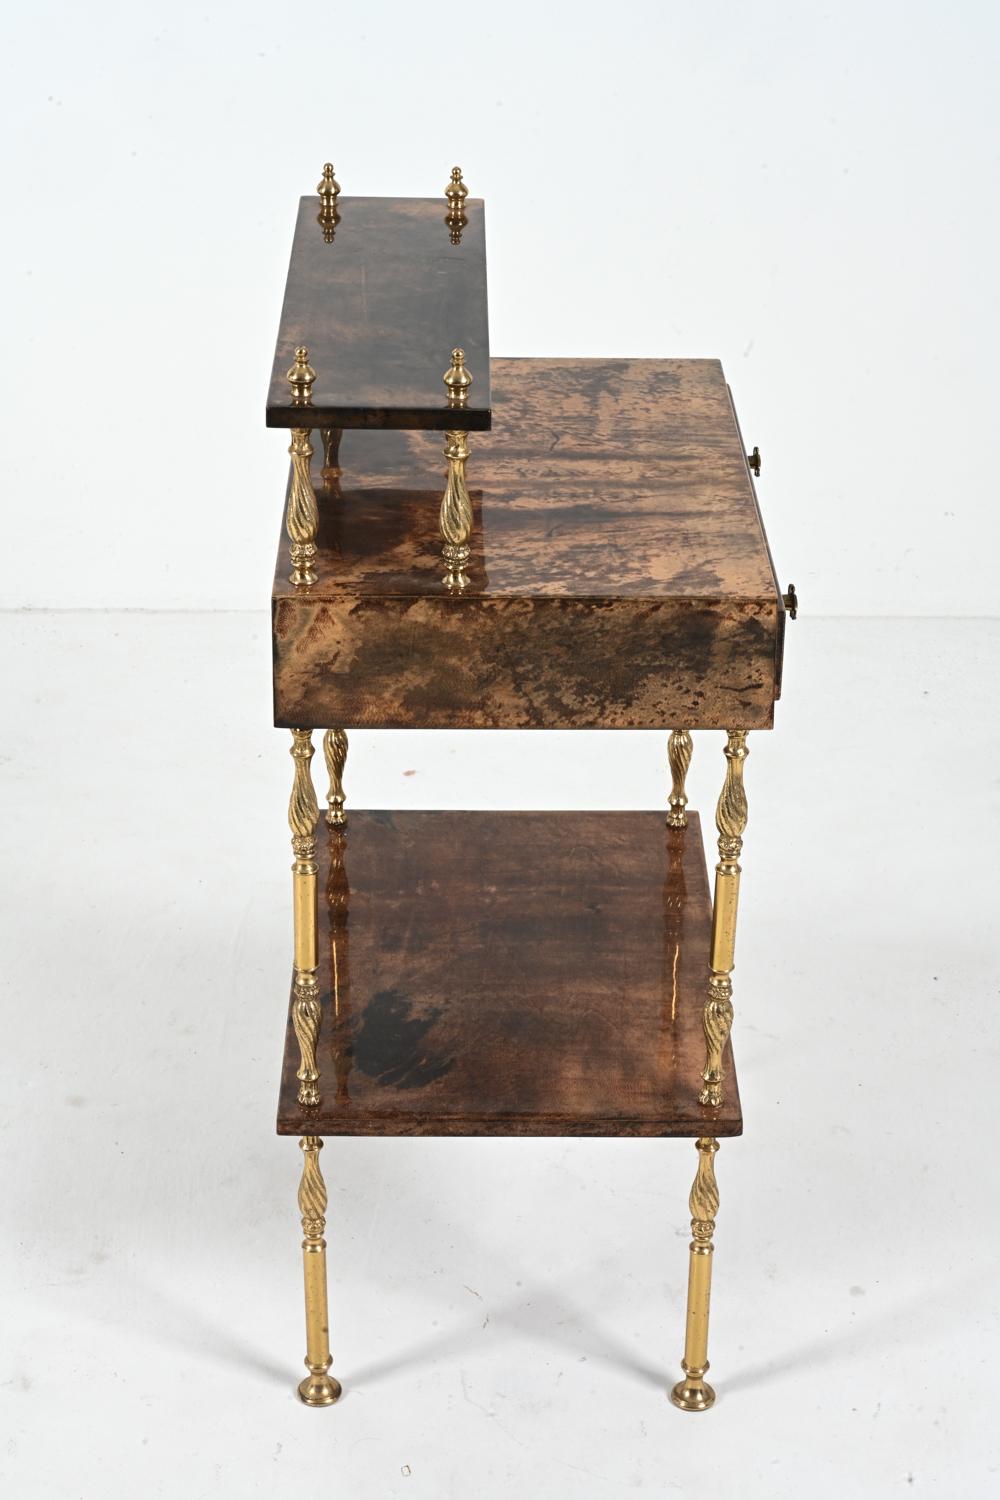 Aldo Tura Lacquered Goatskin & Brass Occasional Table, c. 1960's For Sale 10